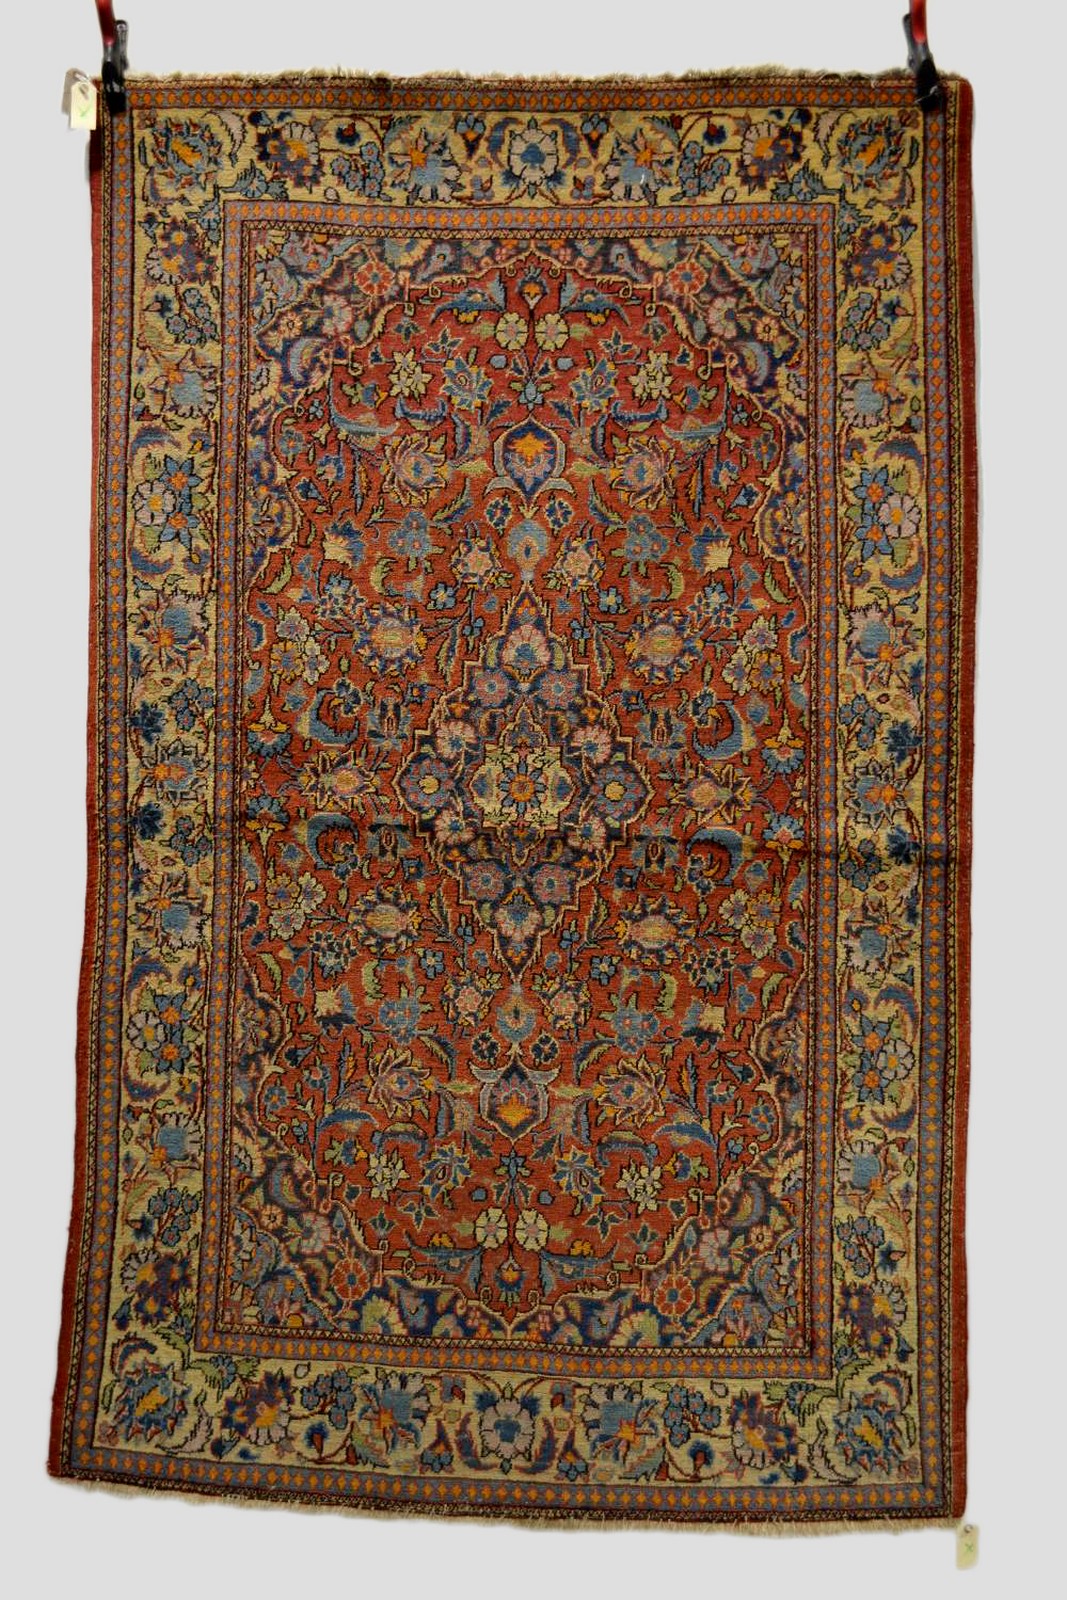 Kashan rug, west Persia, about 1930s, 6ft. 9in. x 4ft. 3in. 2.05m. x 1.30m. Some wear in places.